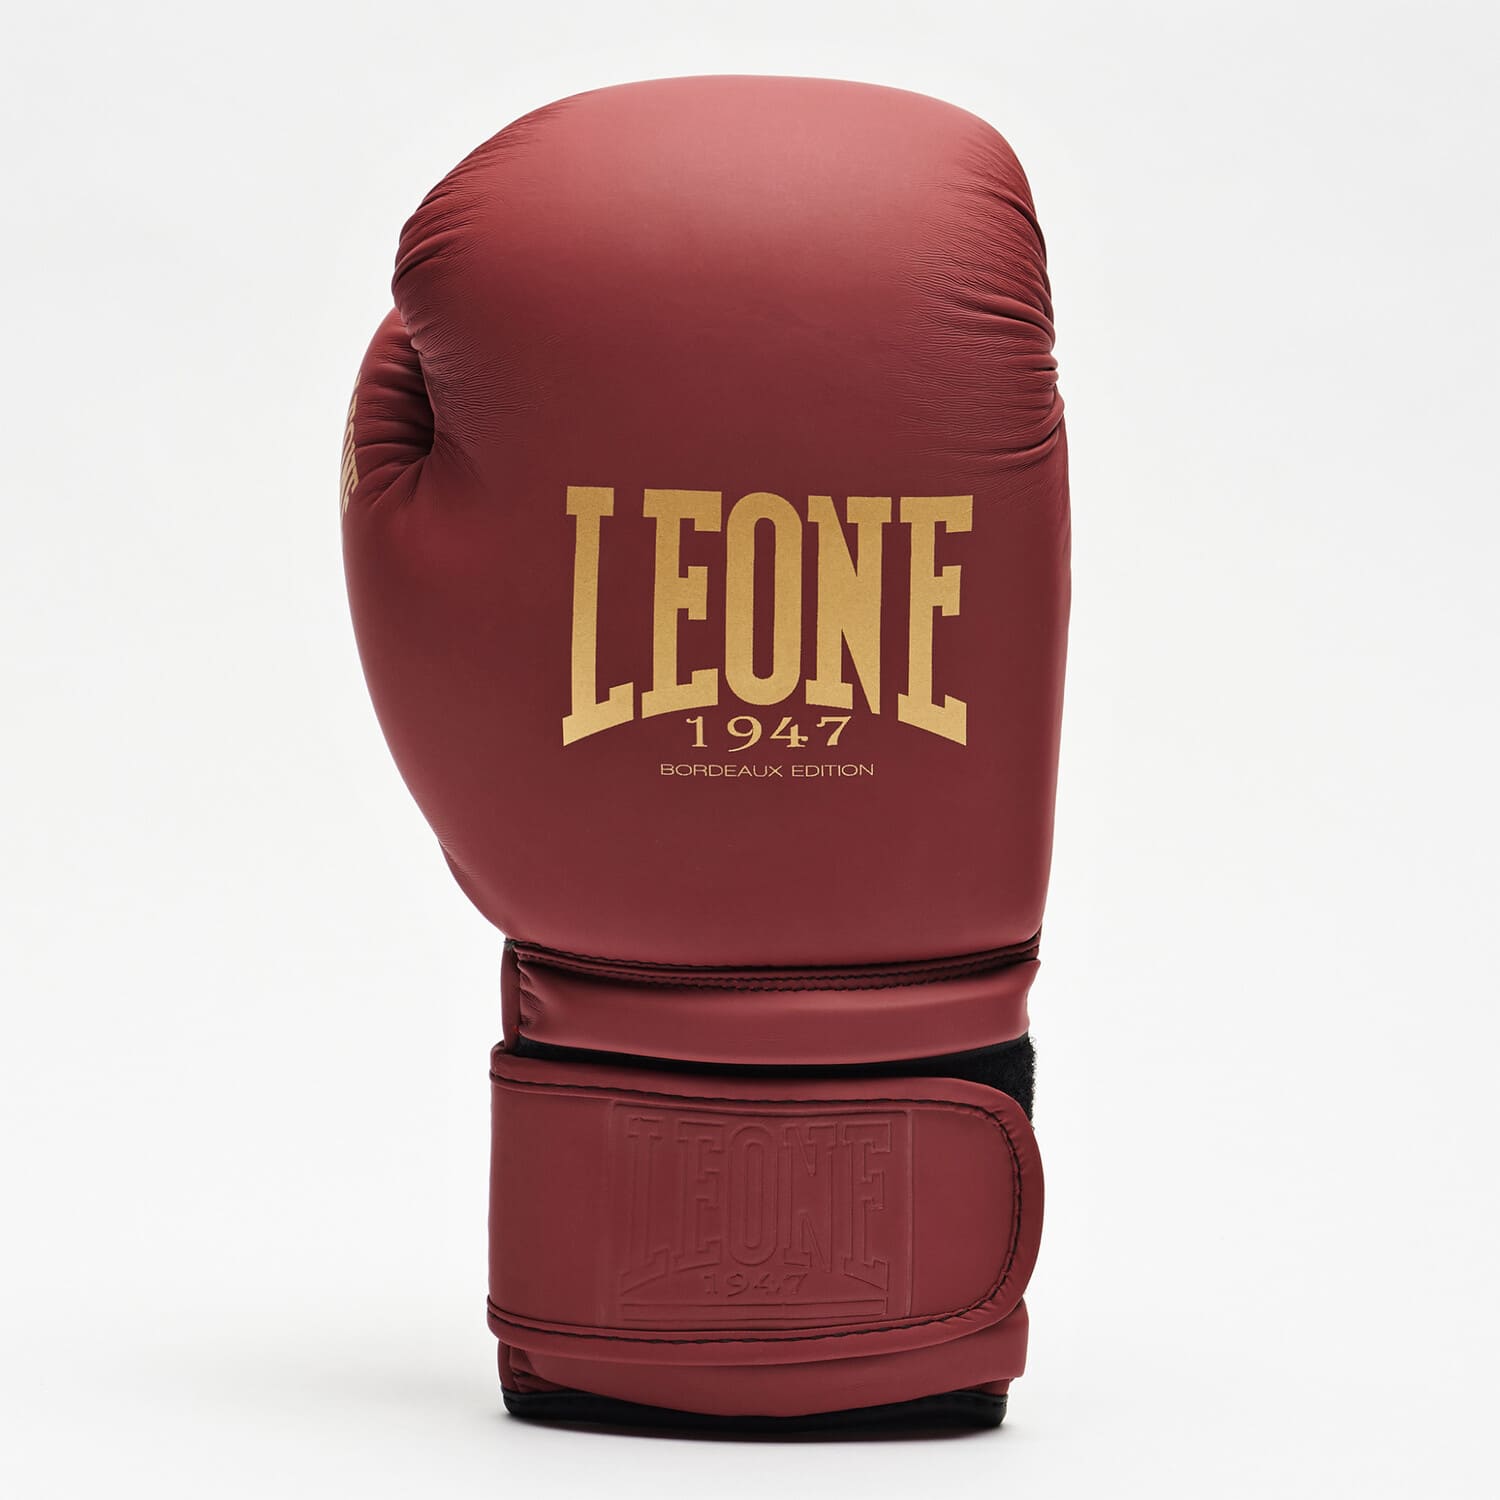 Buy Leone 1947 Boxing Gloves Bordeaux Edition online at low prices -  emparor Fight Shop